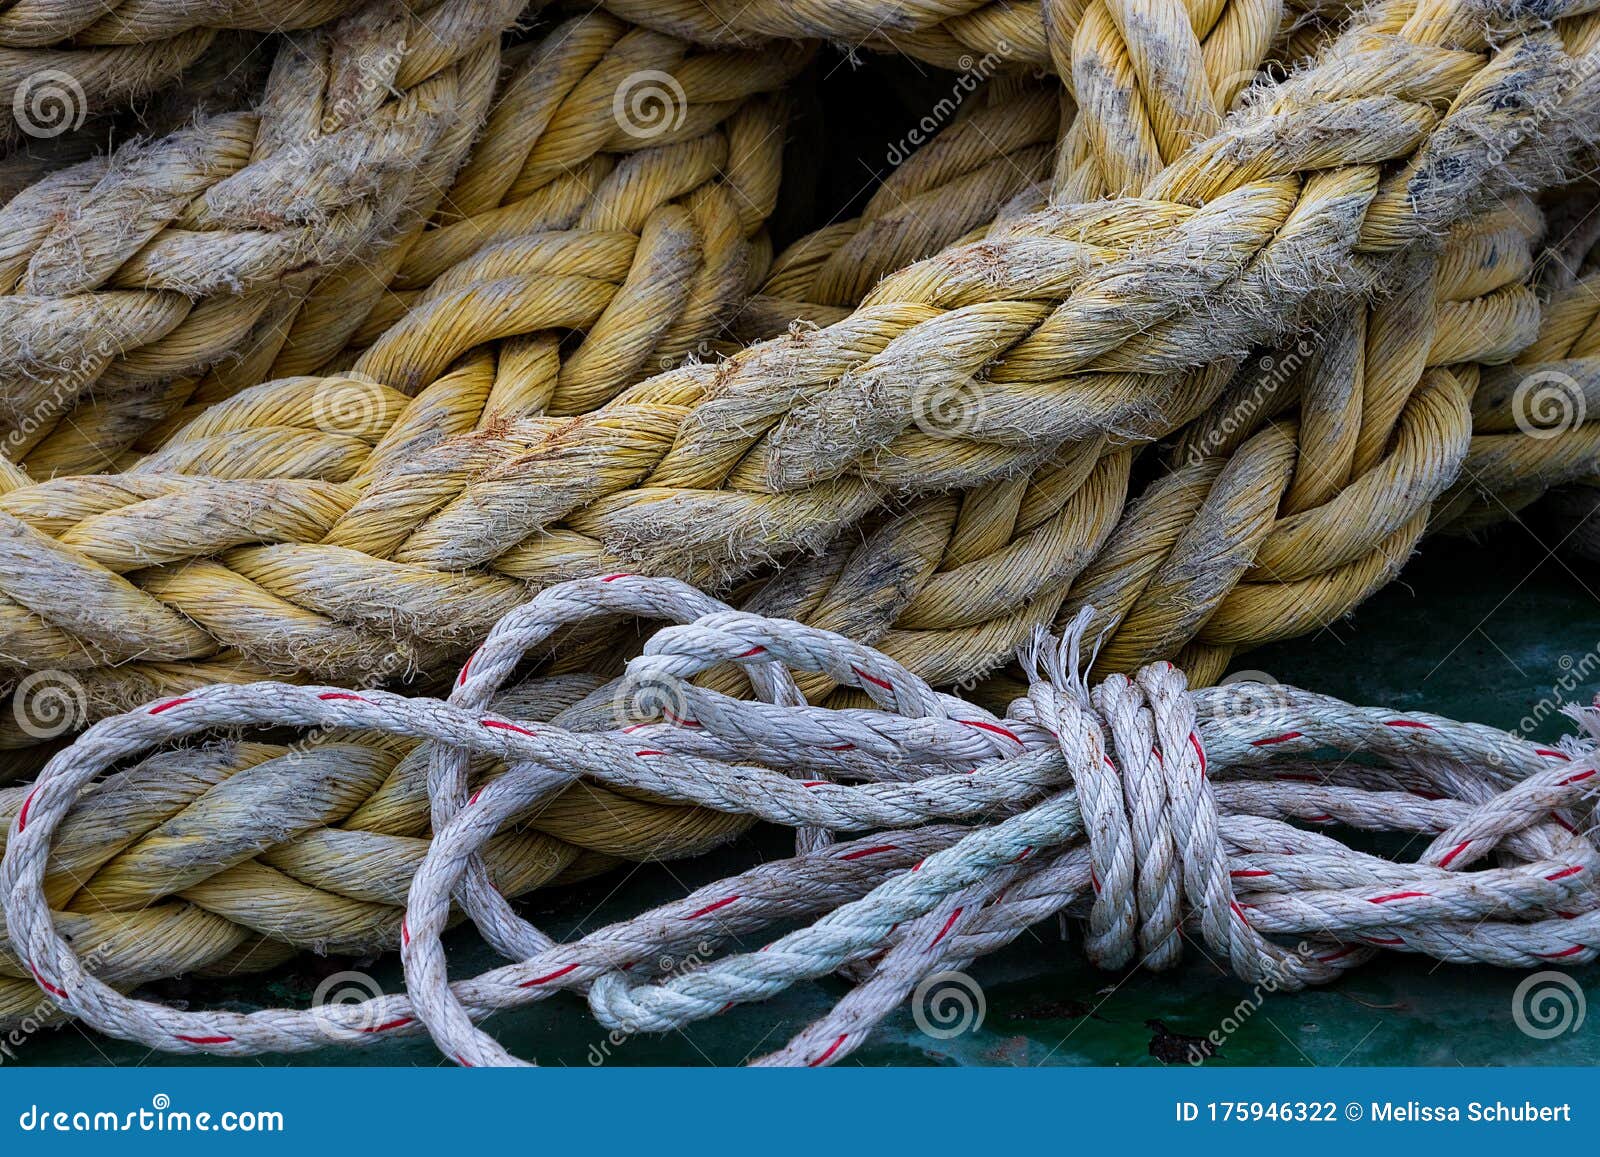 Thick Yellow Cargo Shipping Rope and Thin Boat Rope on Deck Stock Photo -  Image of pile, braid: 175946322